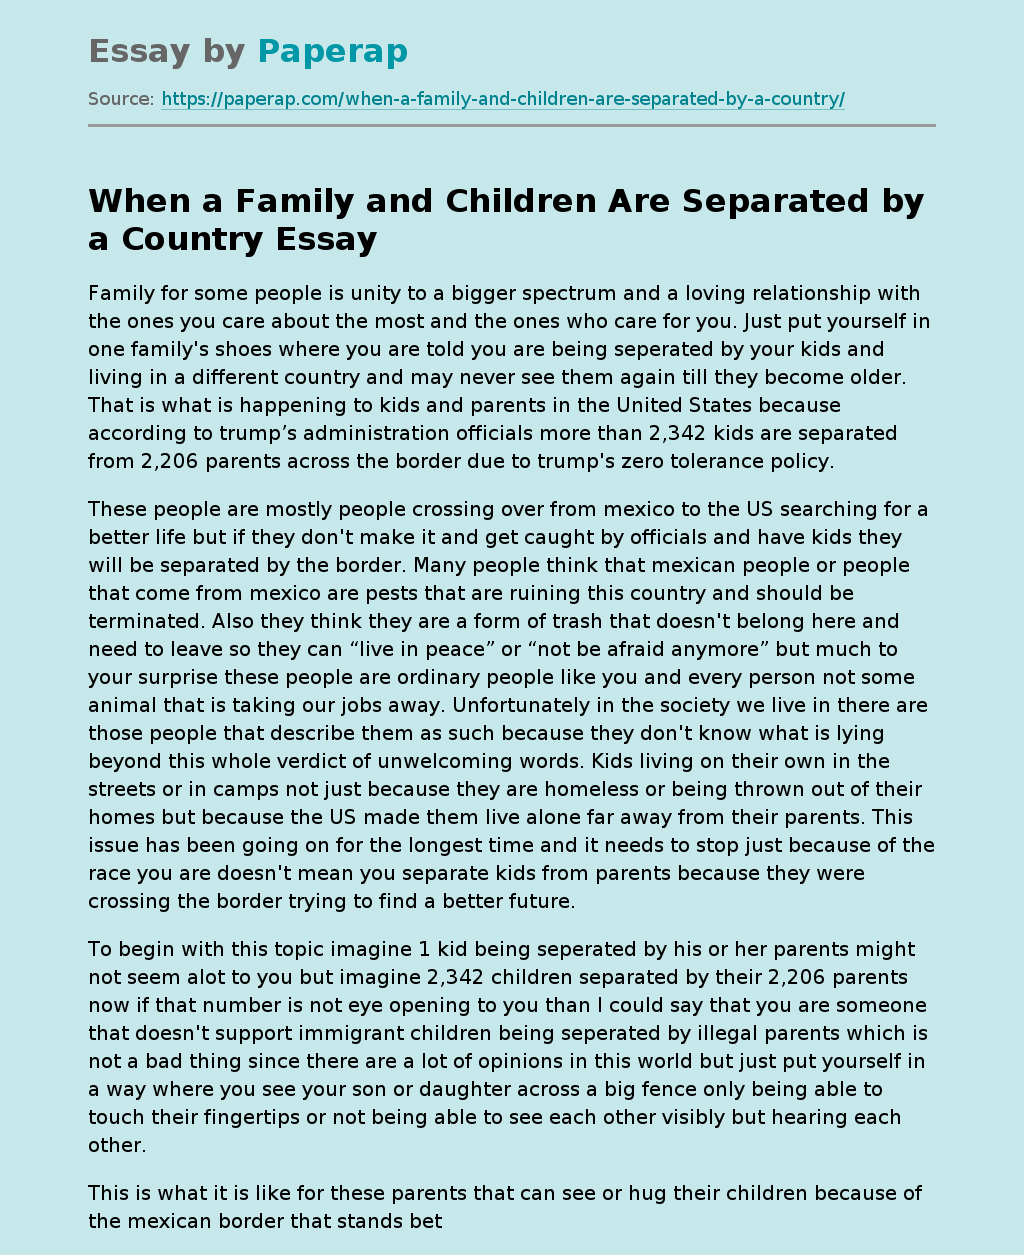 When a Family and Children Are Separated by a Country